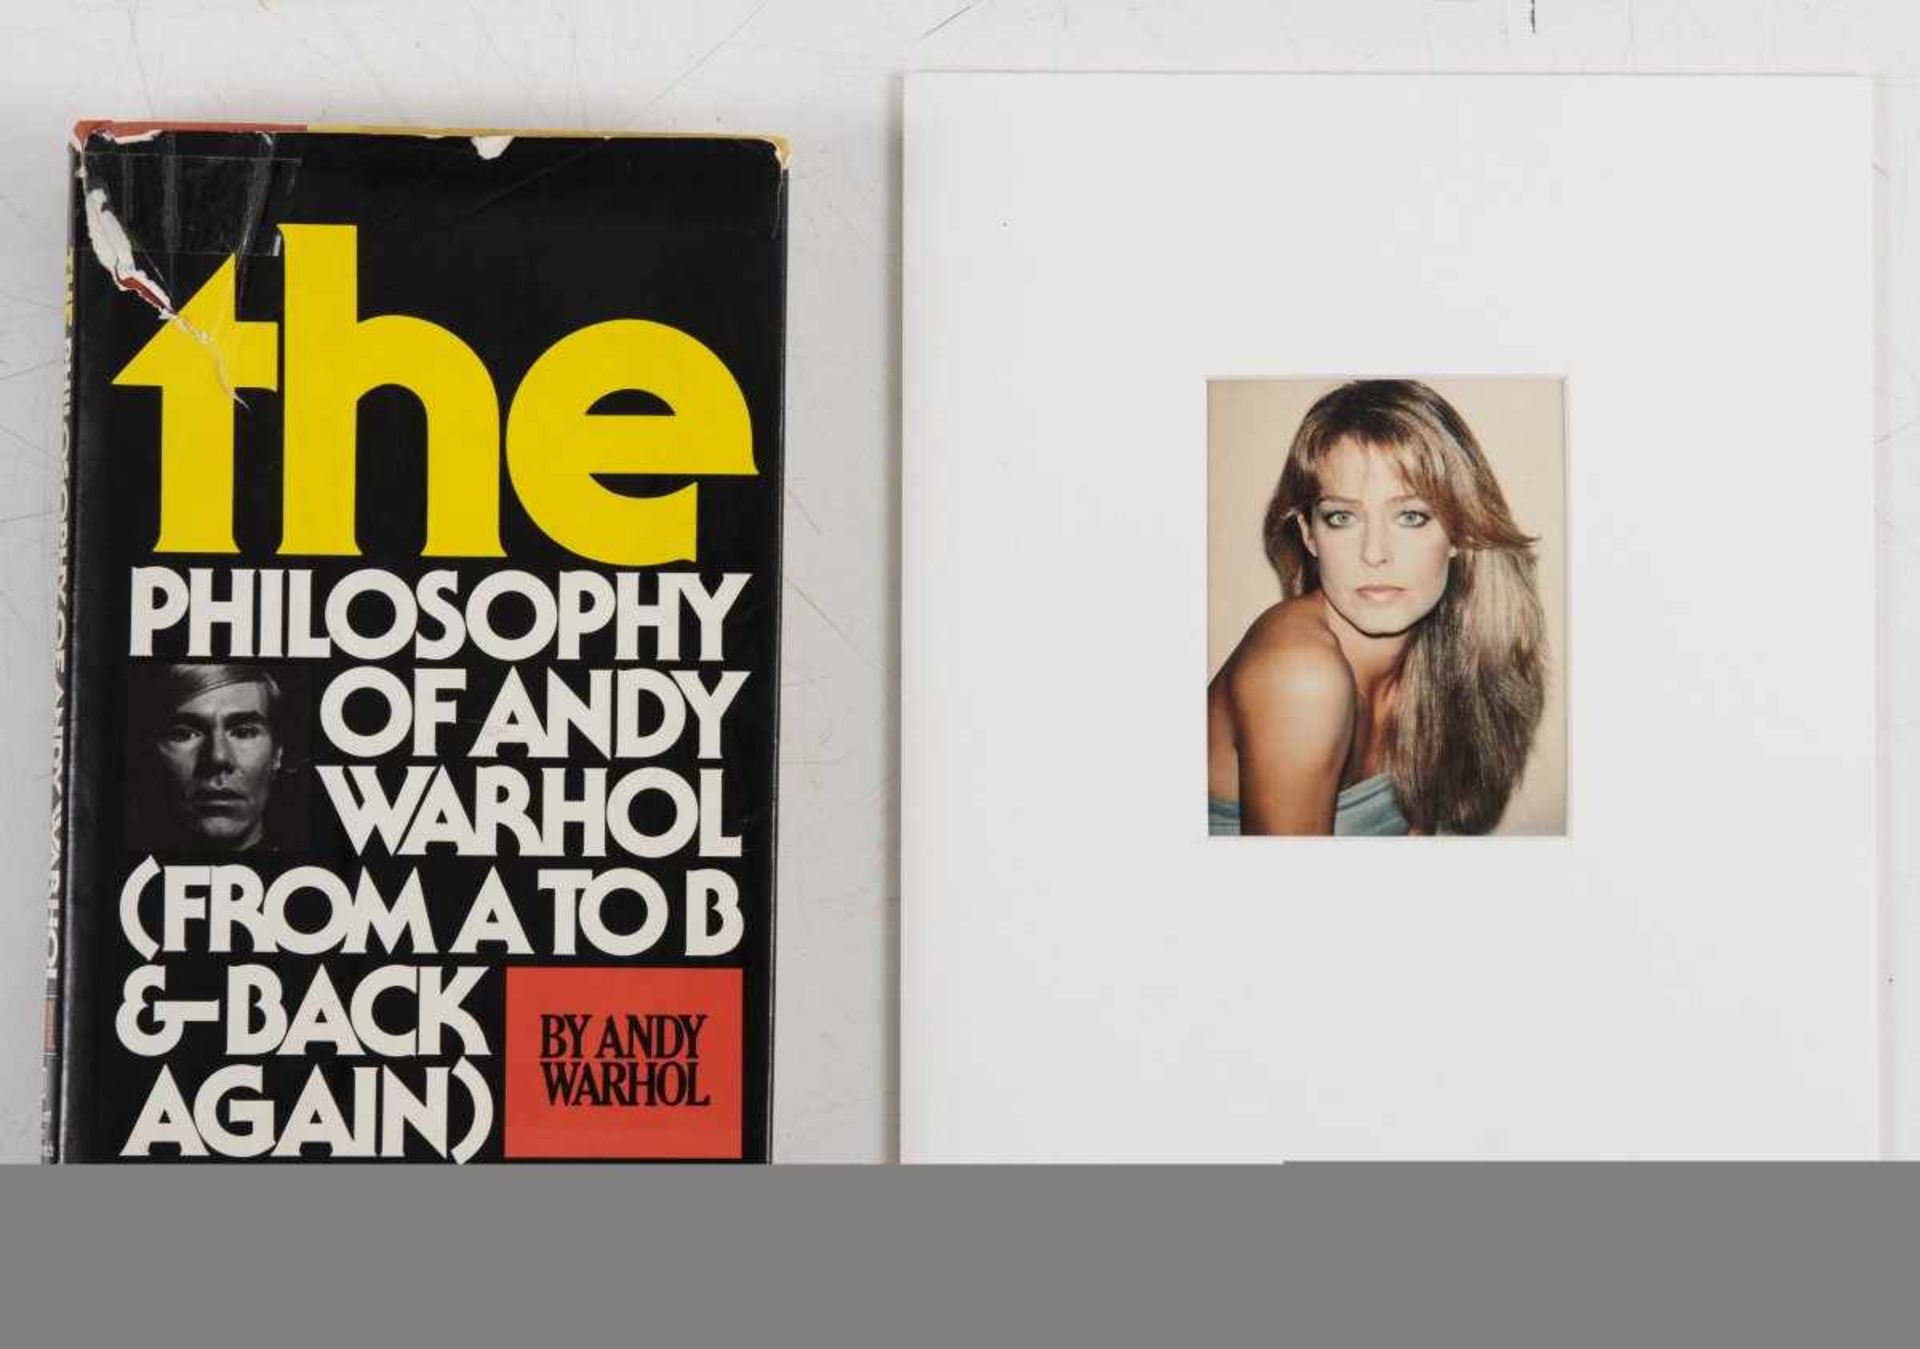 Andy Warhol (Pittsburgh 1928 - 1987 New York), 'The Philosophie of Andy Warhol', 1975'The